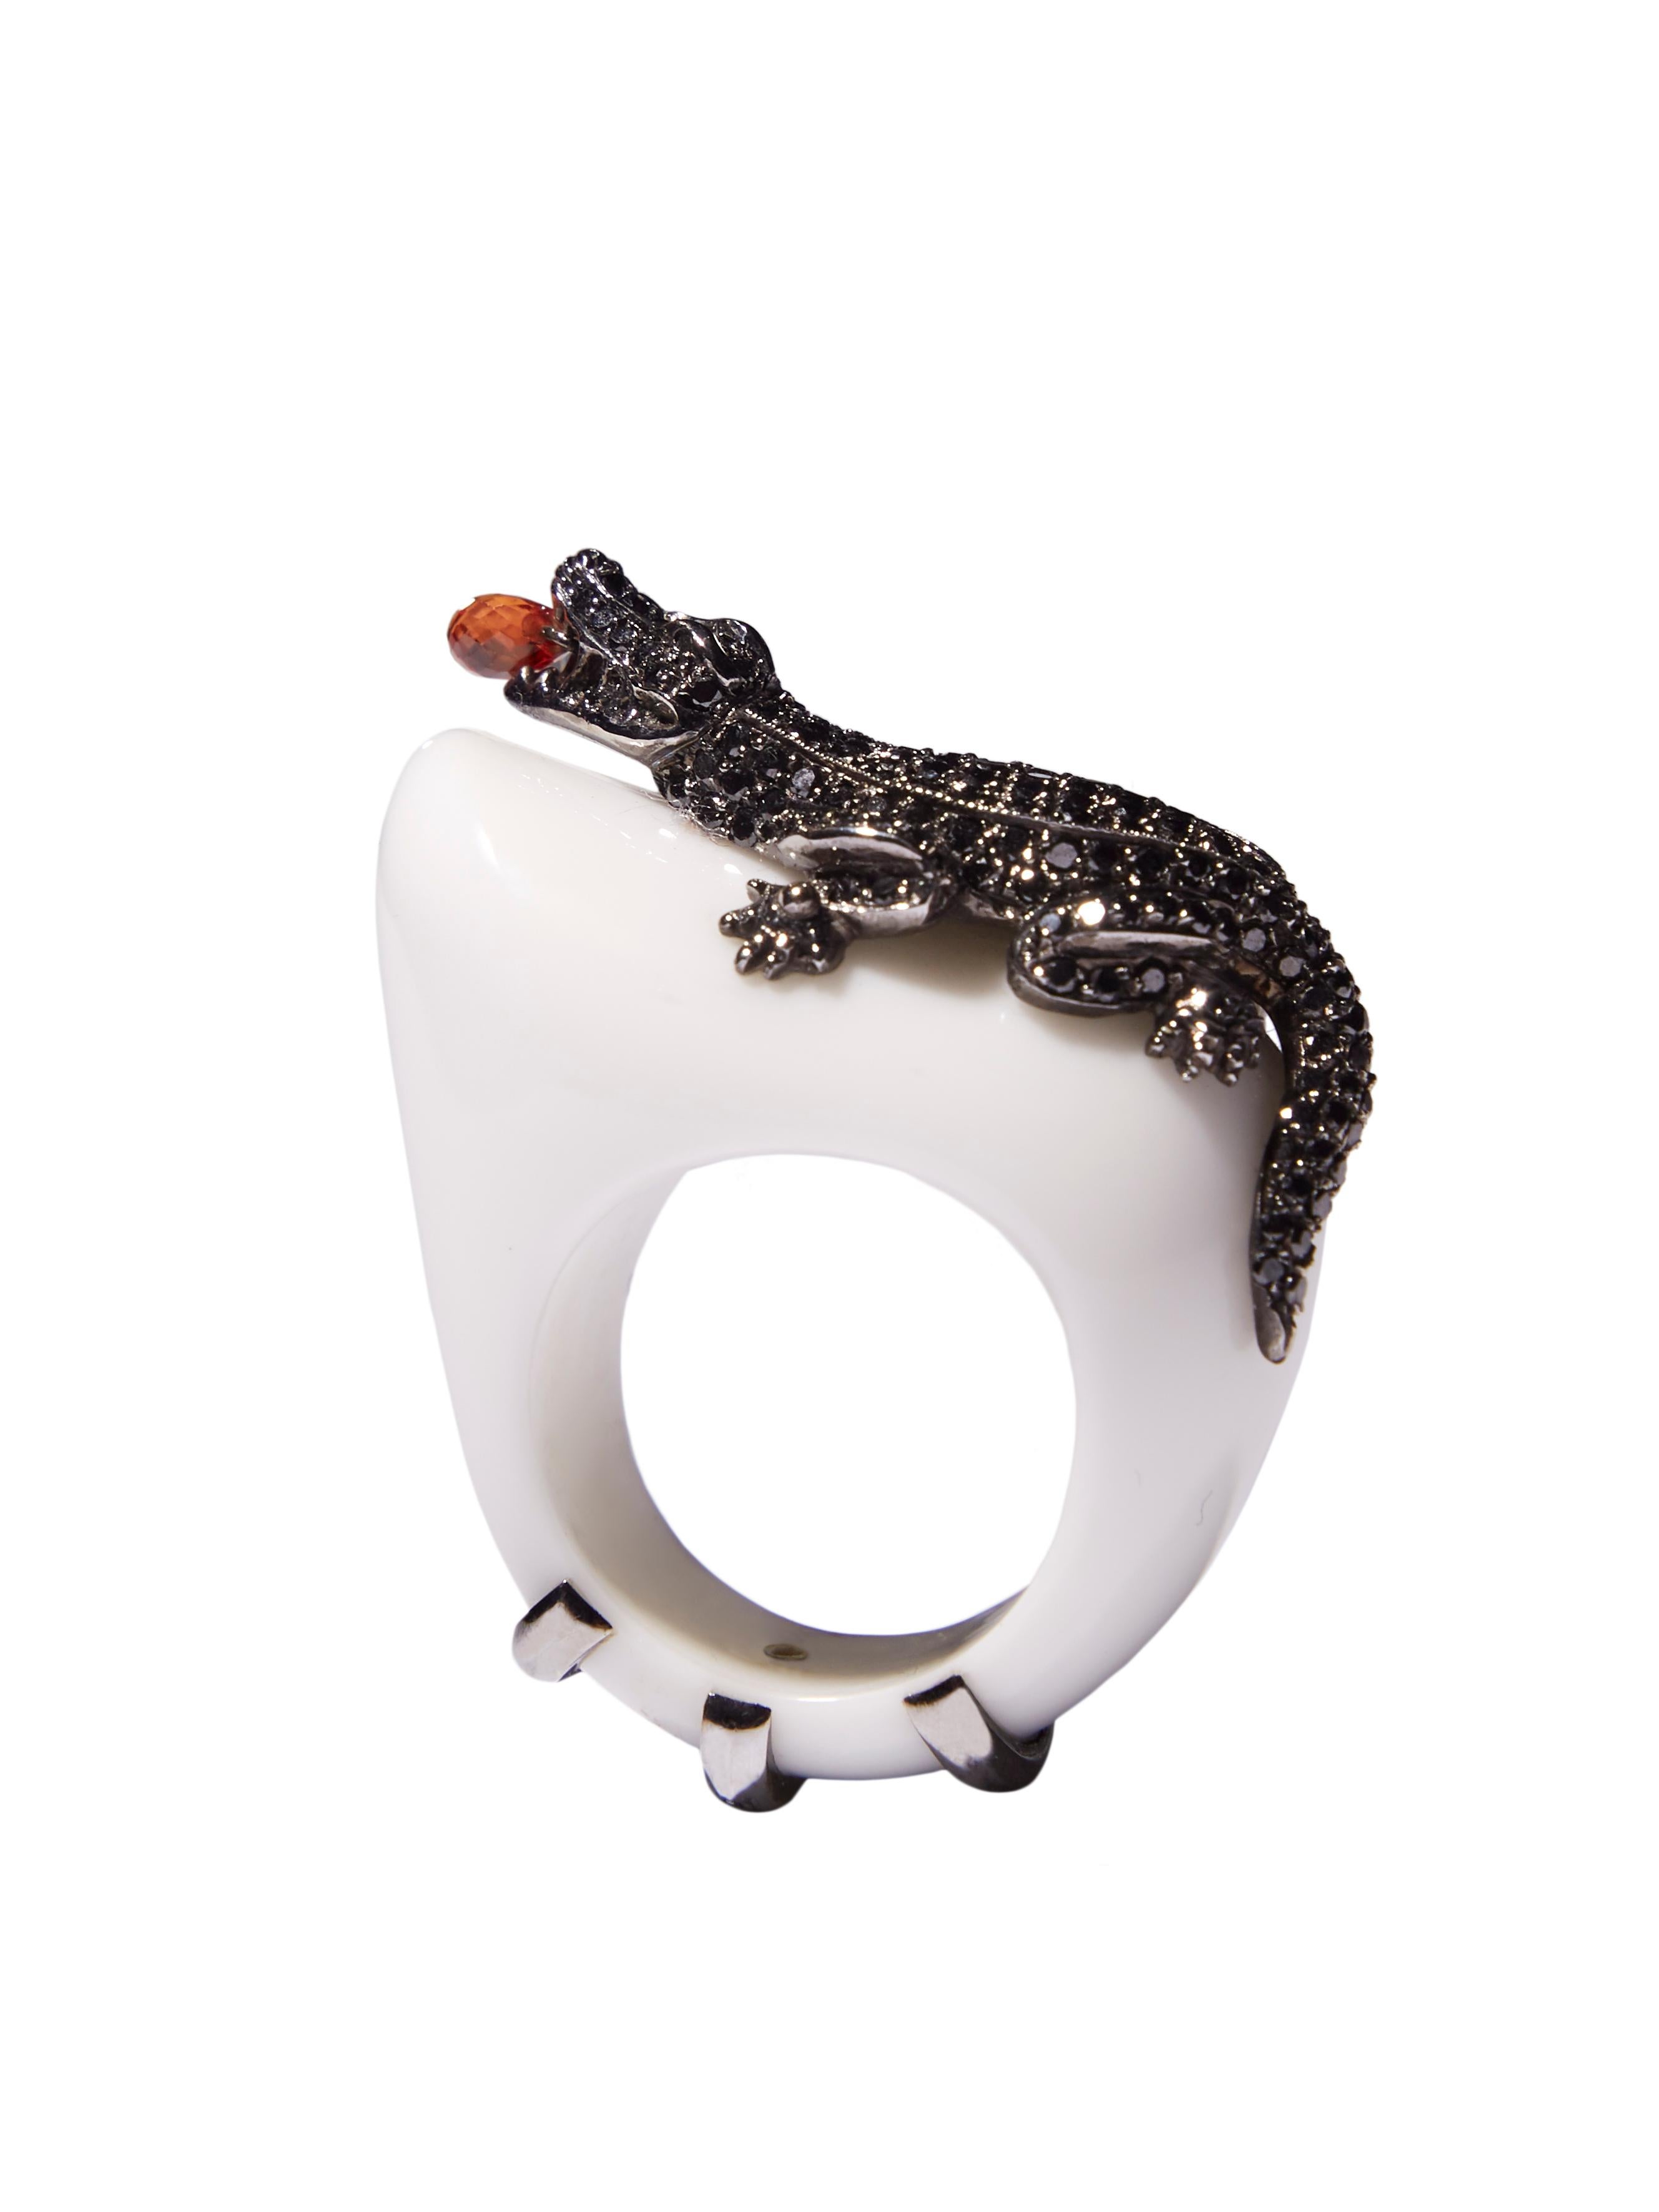 Mixed Cut Black Diamond Alligator on White Agate in White Gold For Sale